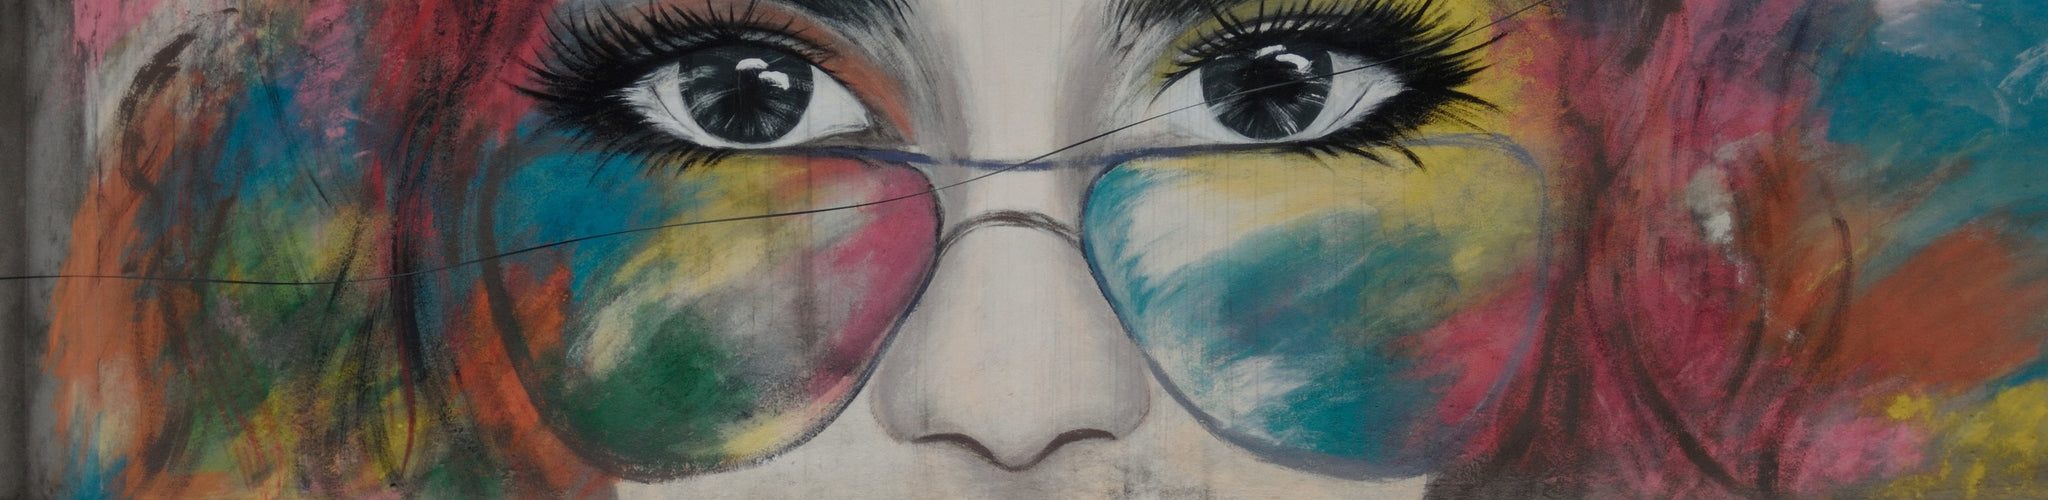 mural of woman looking over sunglasses